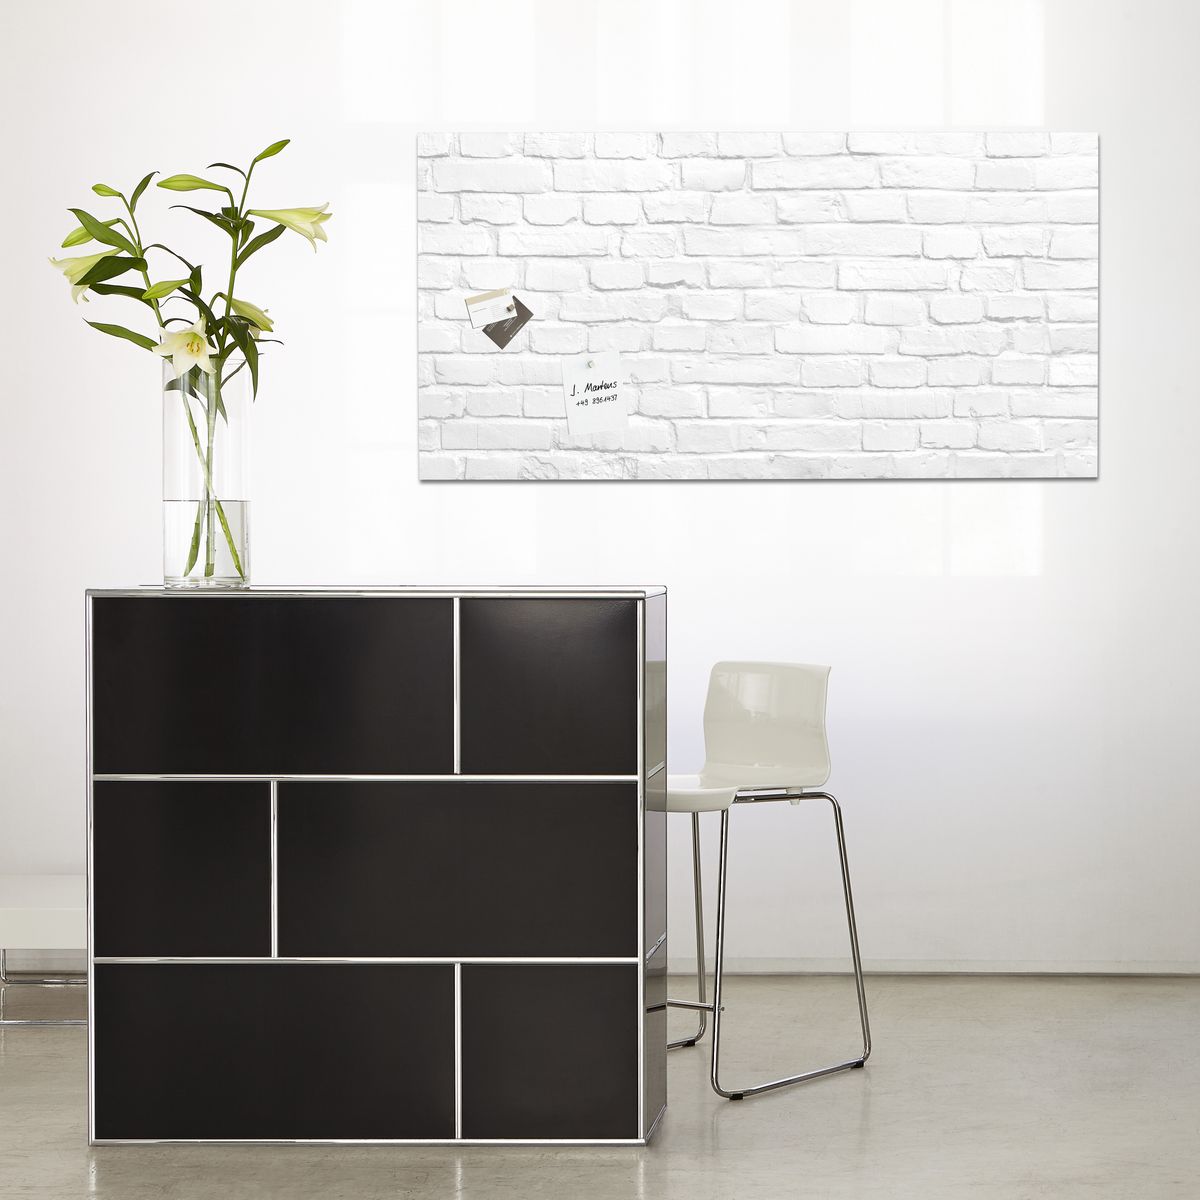 GL244 - Sigel - Magnetic Glass Boards - White Stone - 130 x 55 cm